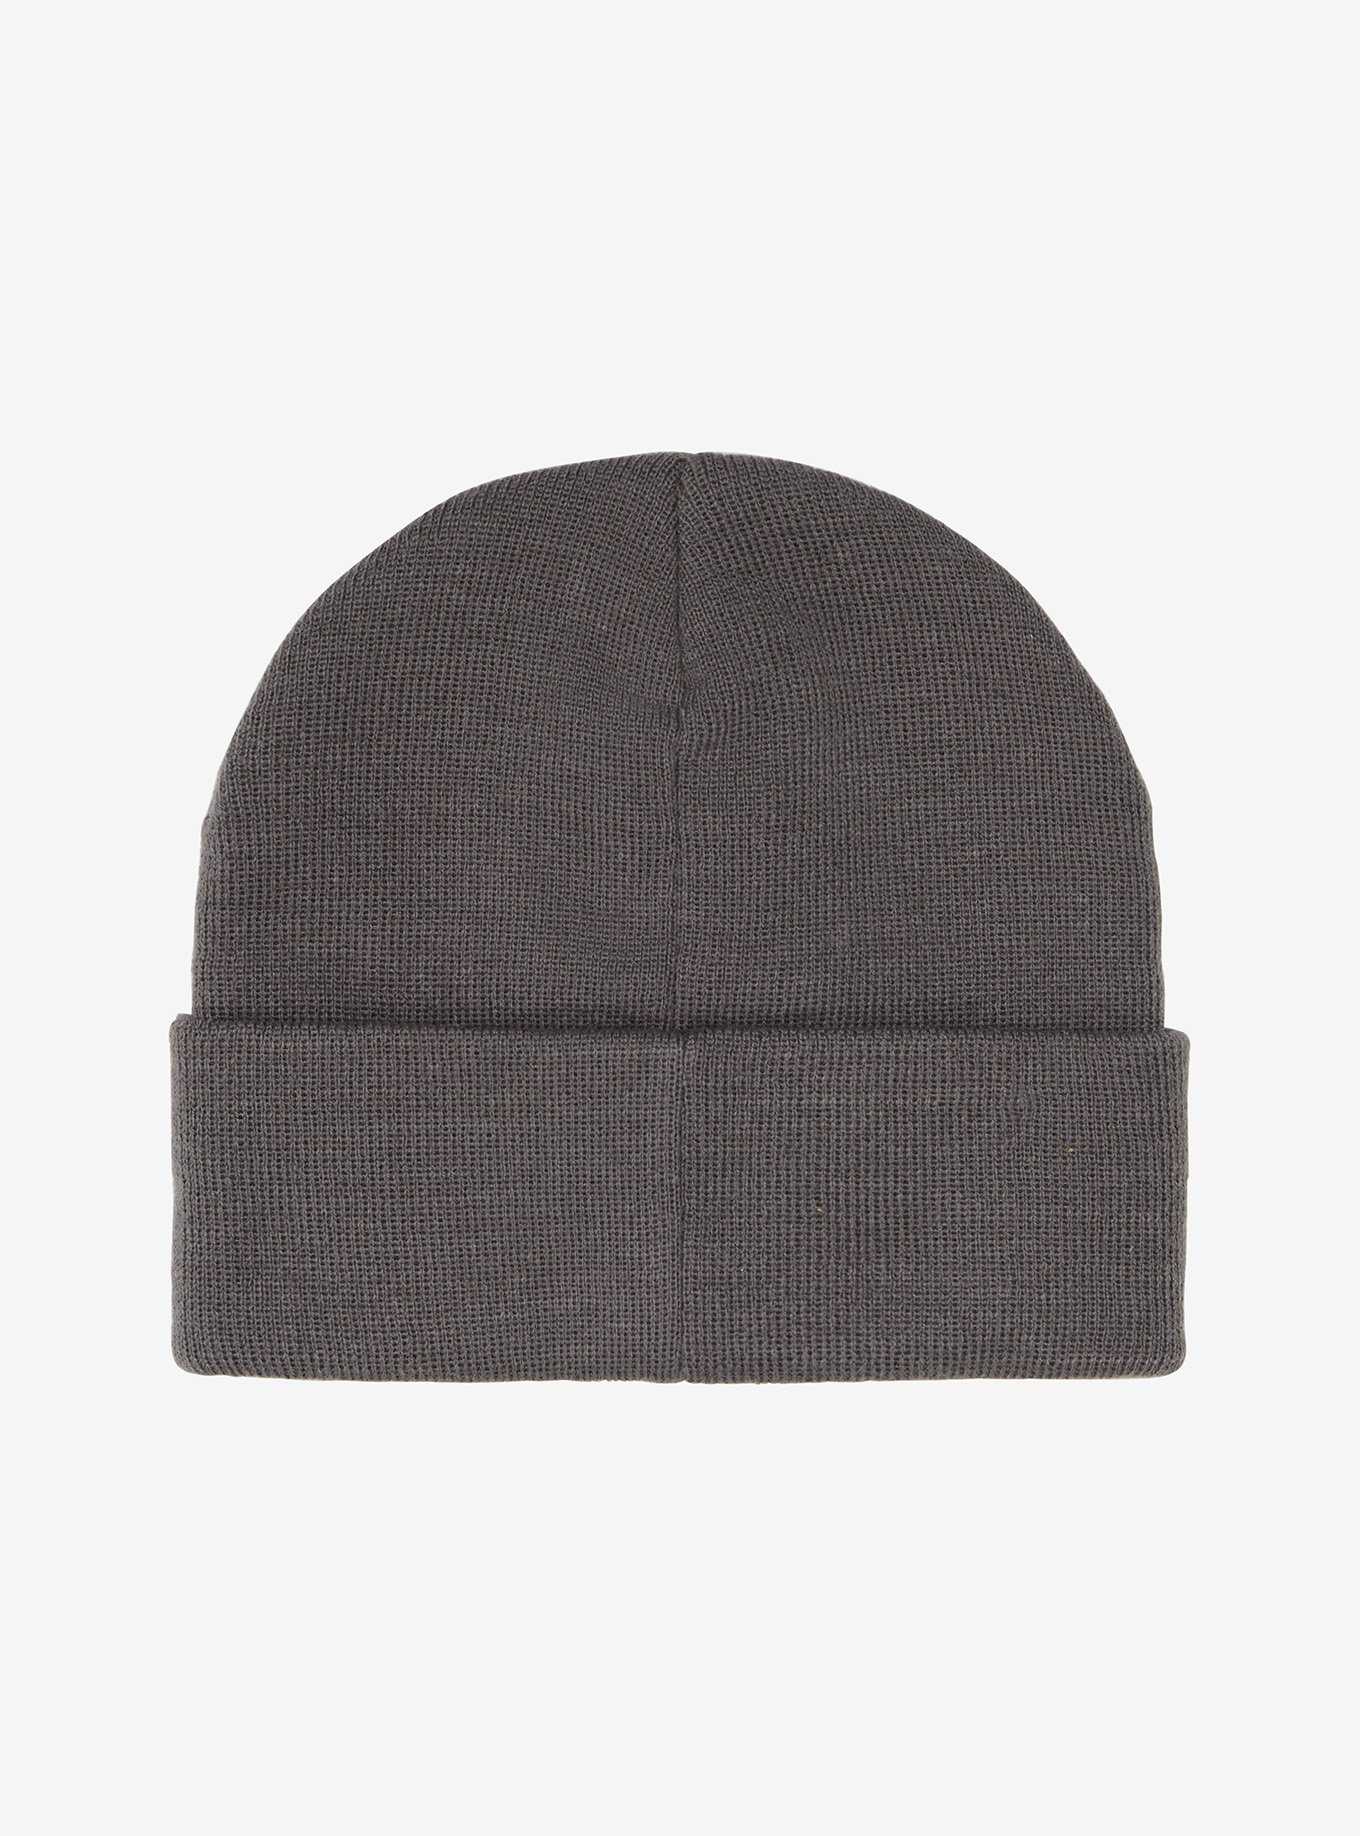 Cool Beanies: Slouchy, Trendy & Pop Culture Beanies | BoxLunch